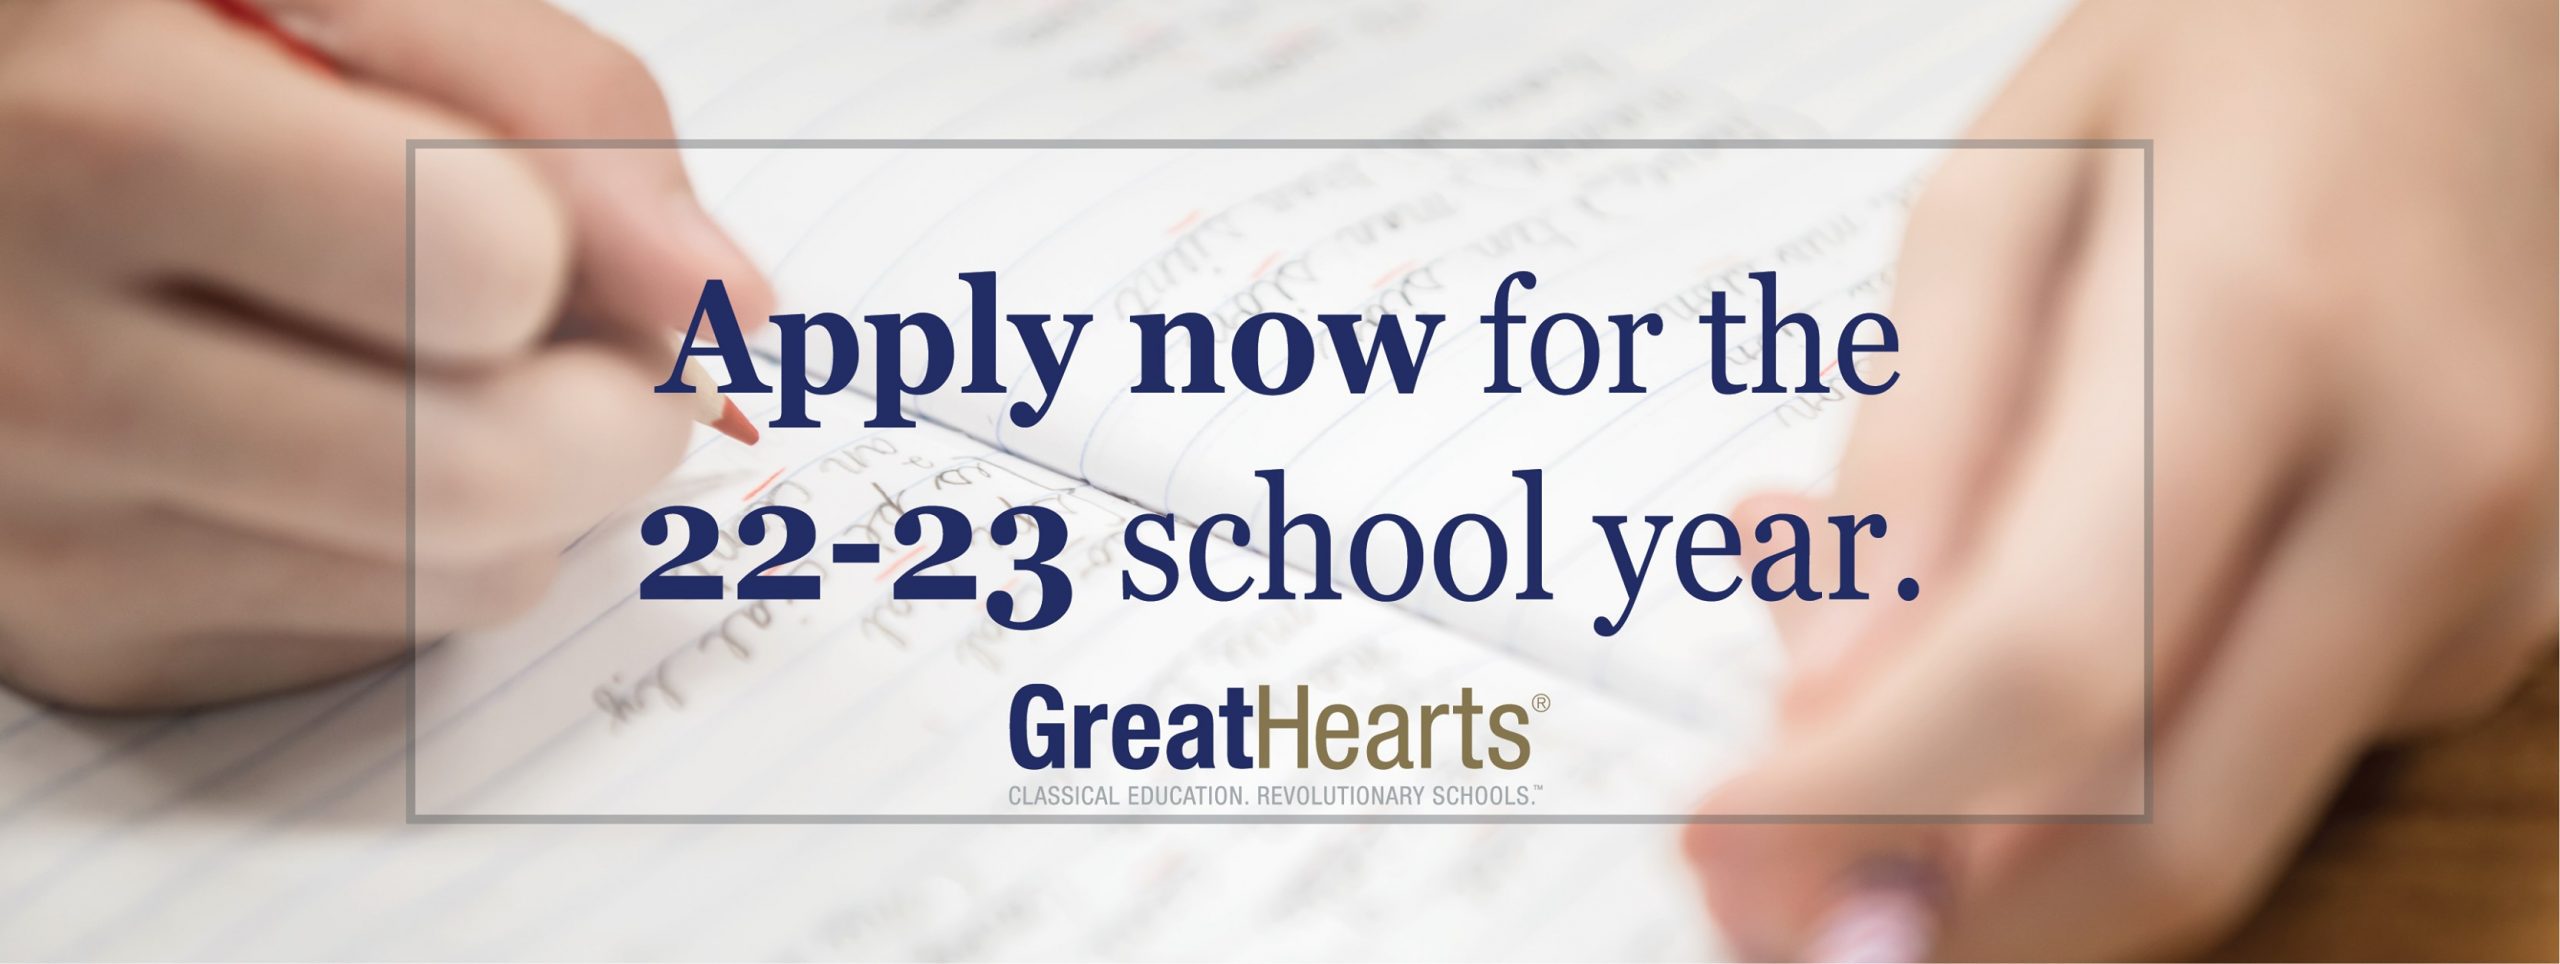 Great Hearts Apply Now